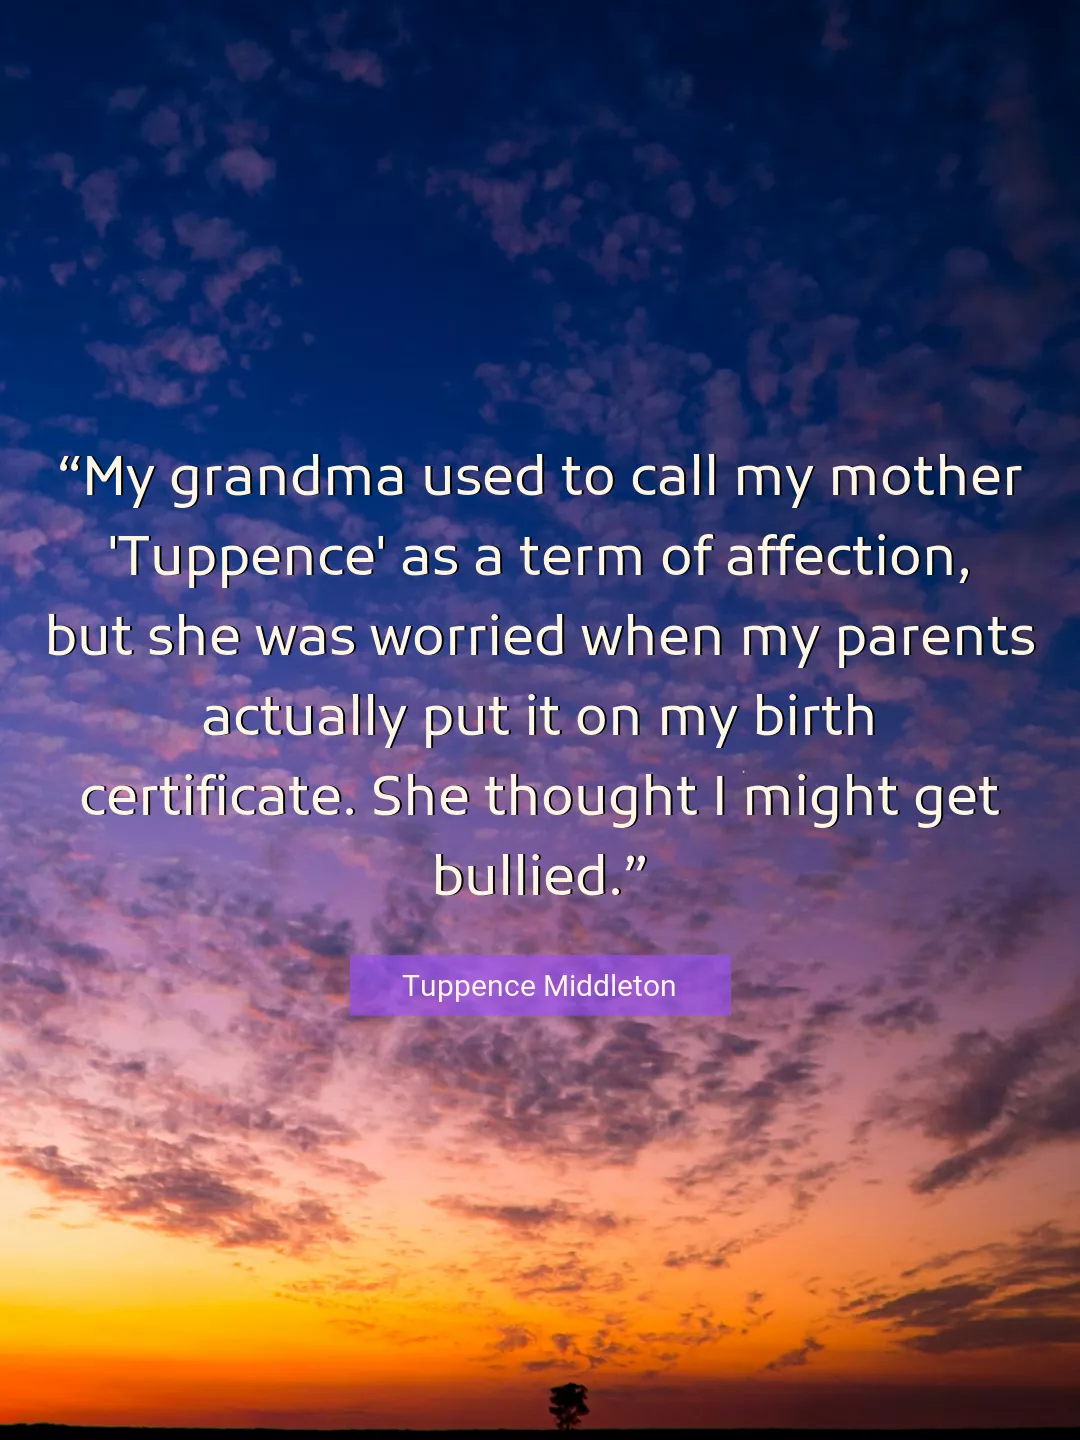 Quote About Parents By Tuppence Middleton